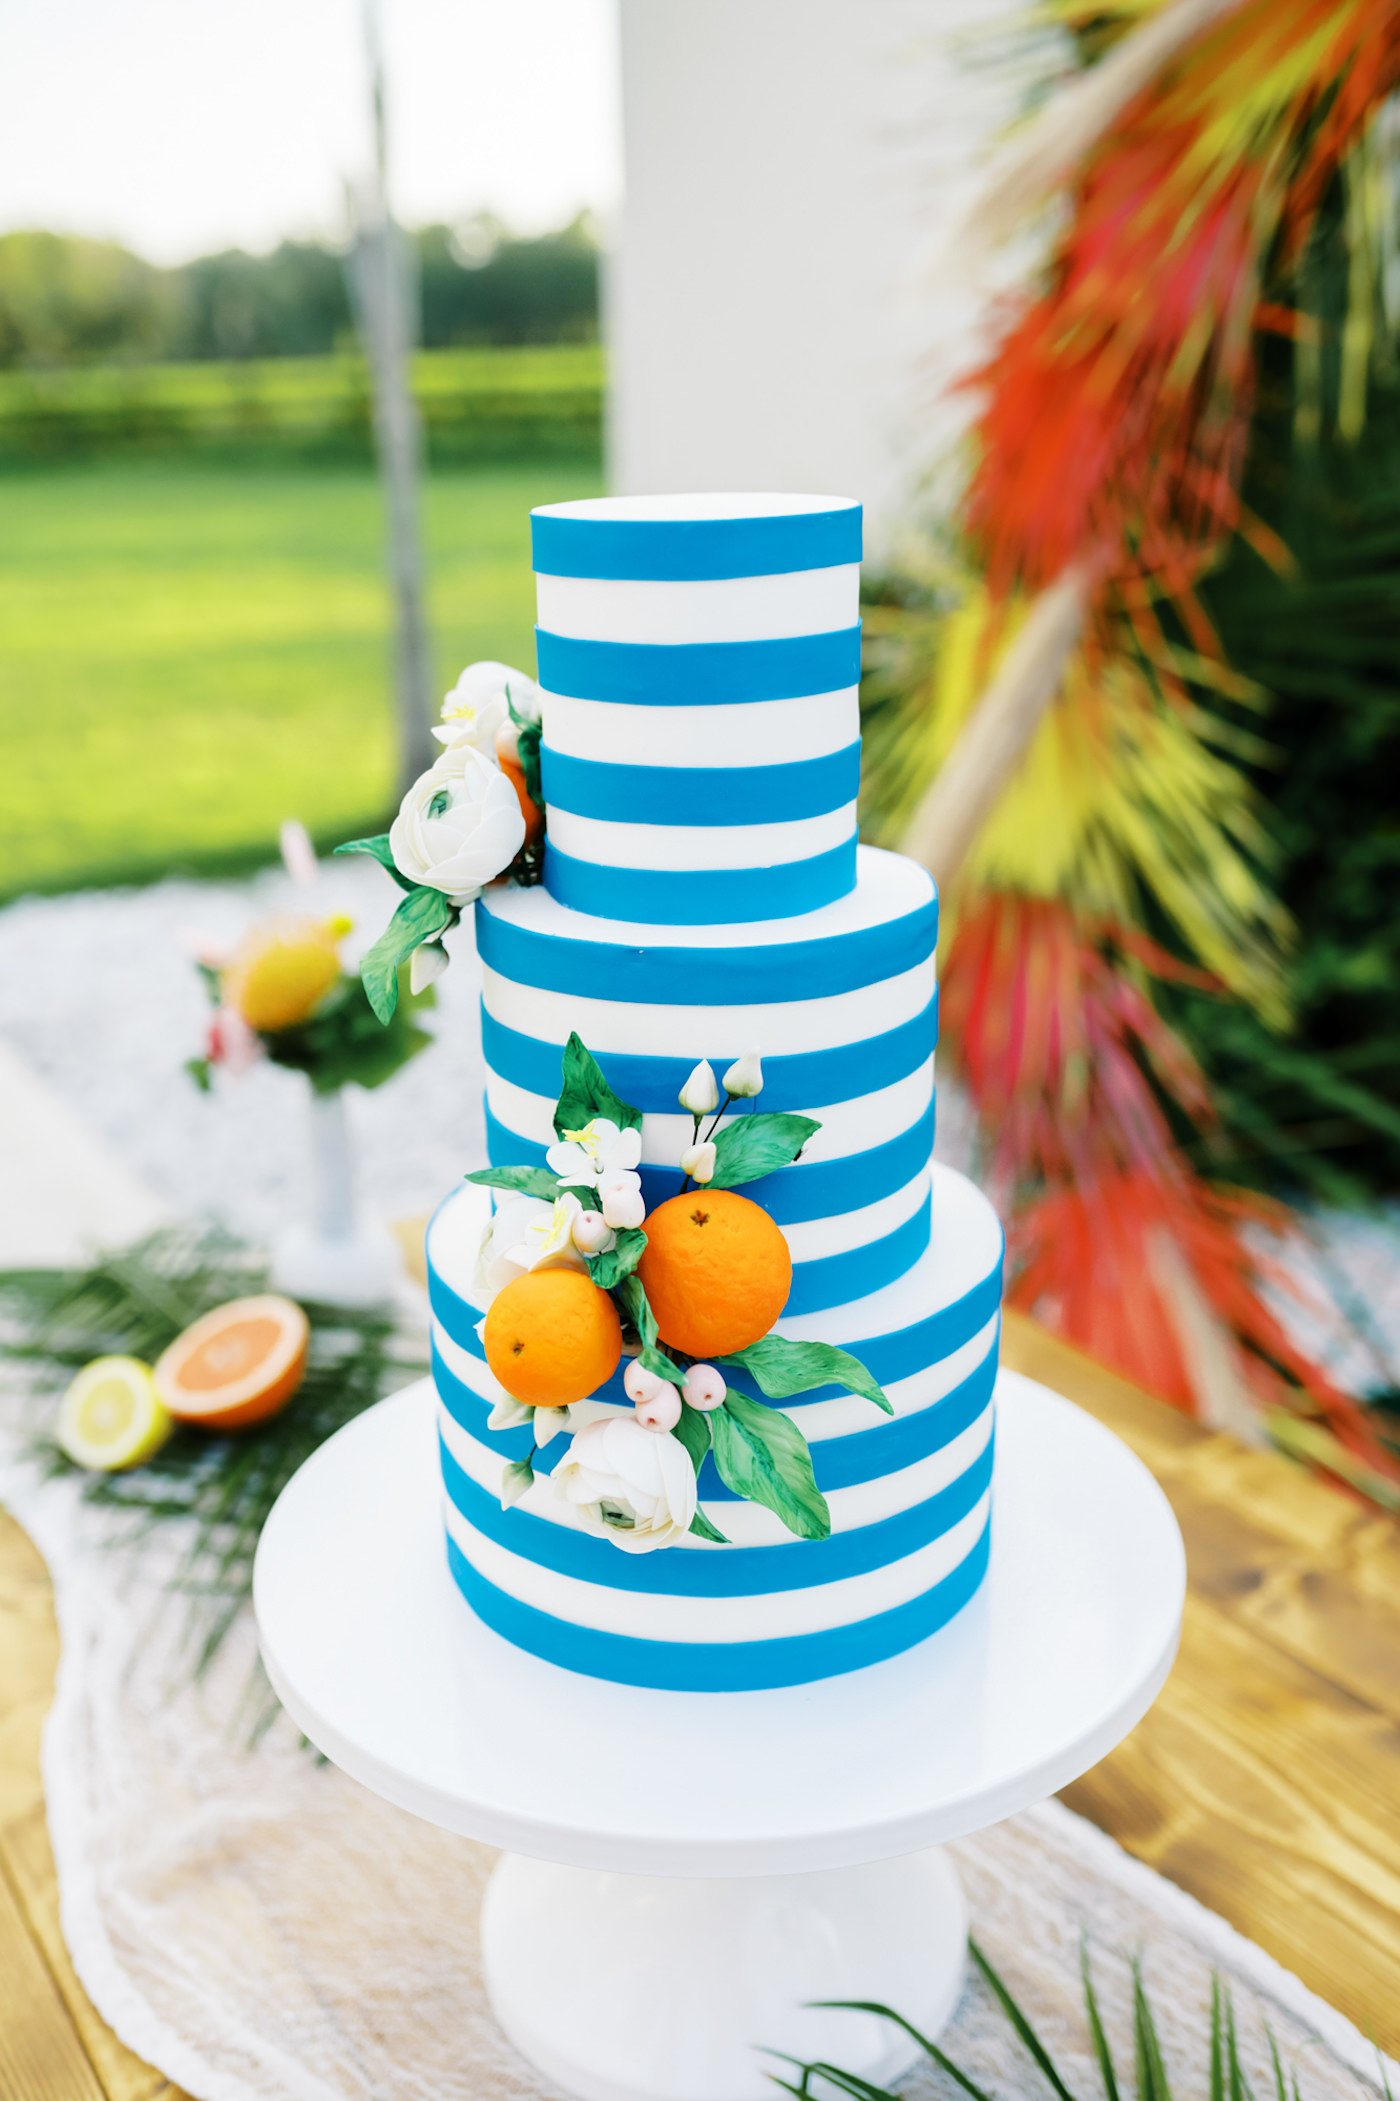 Wood Farm Table Wedding Cake Display | Three Tier Blue and White Stripe Wedding Cake with Fresh Citrus by Tampa Bay Cake Company Bakery | Tropical Florida Citrus Wedding Inspiration